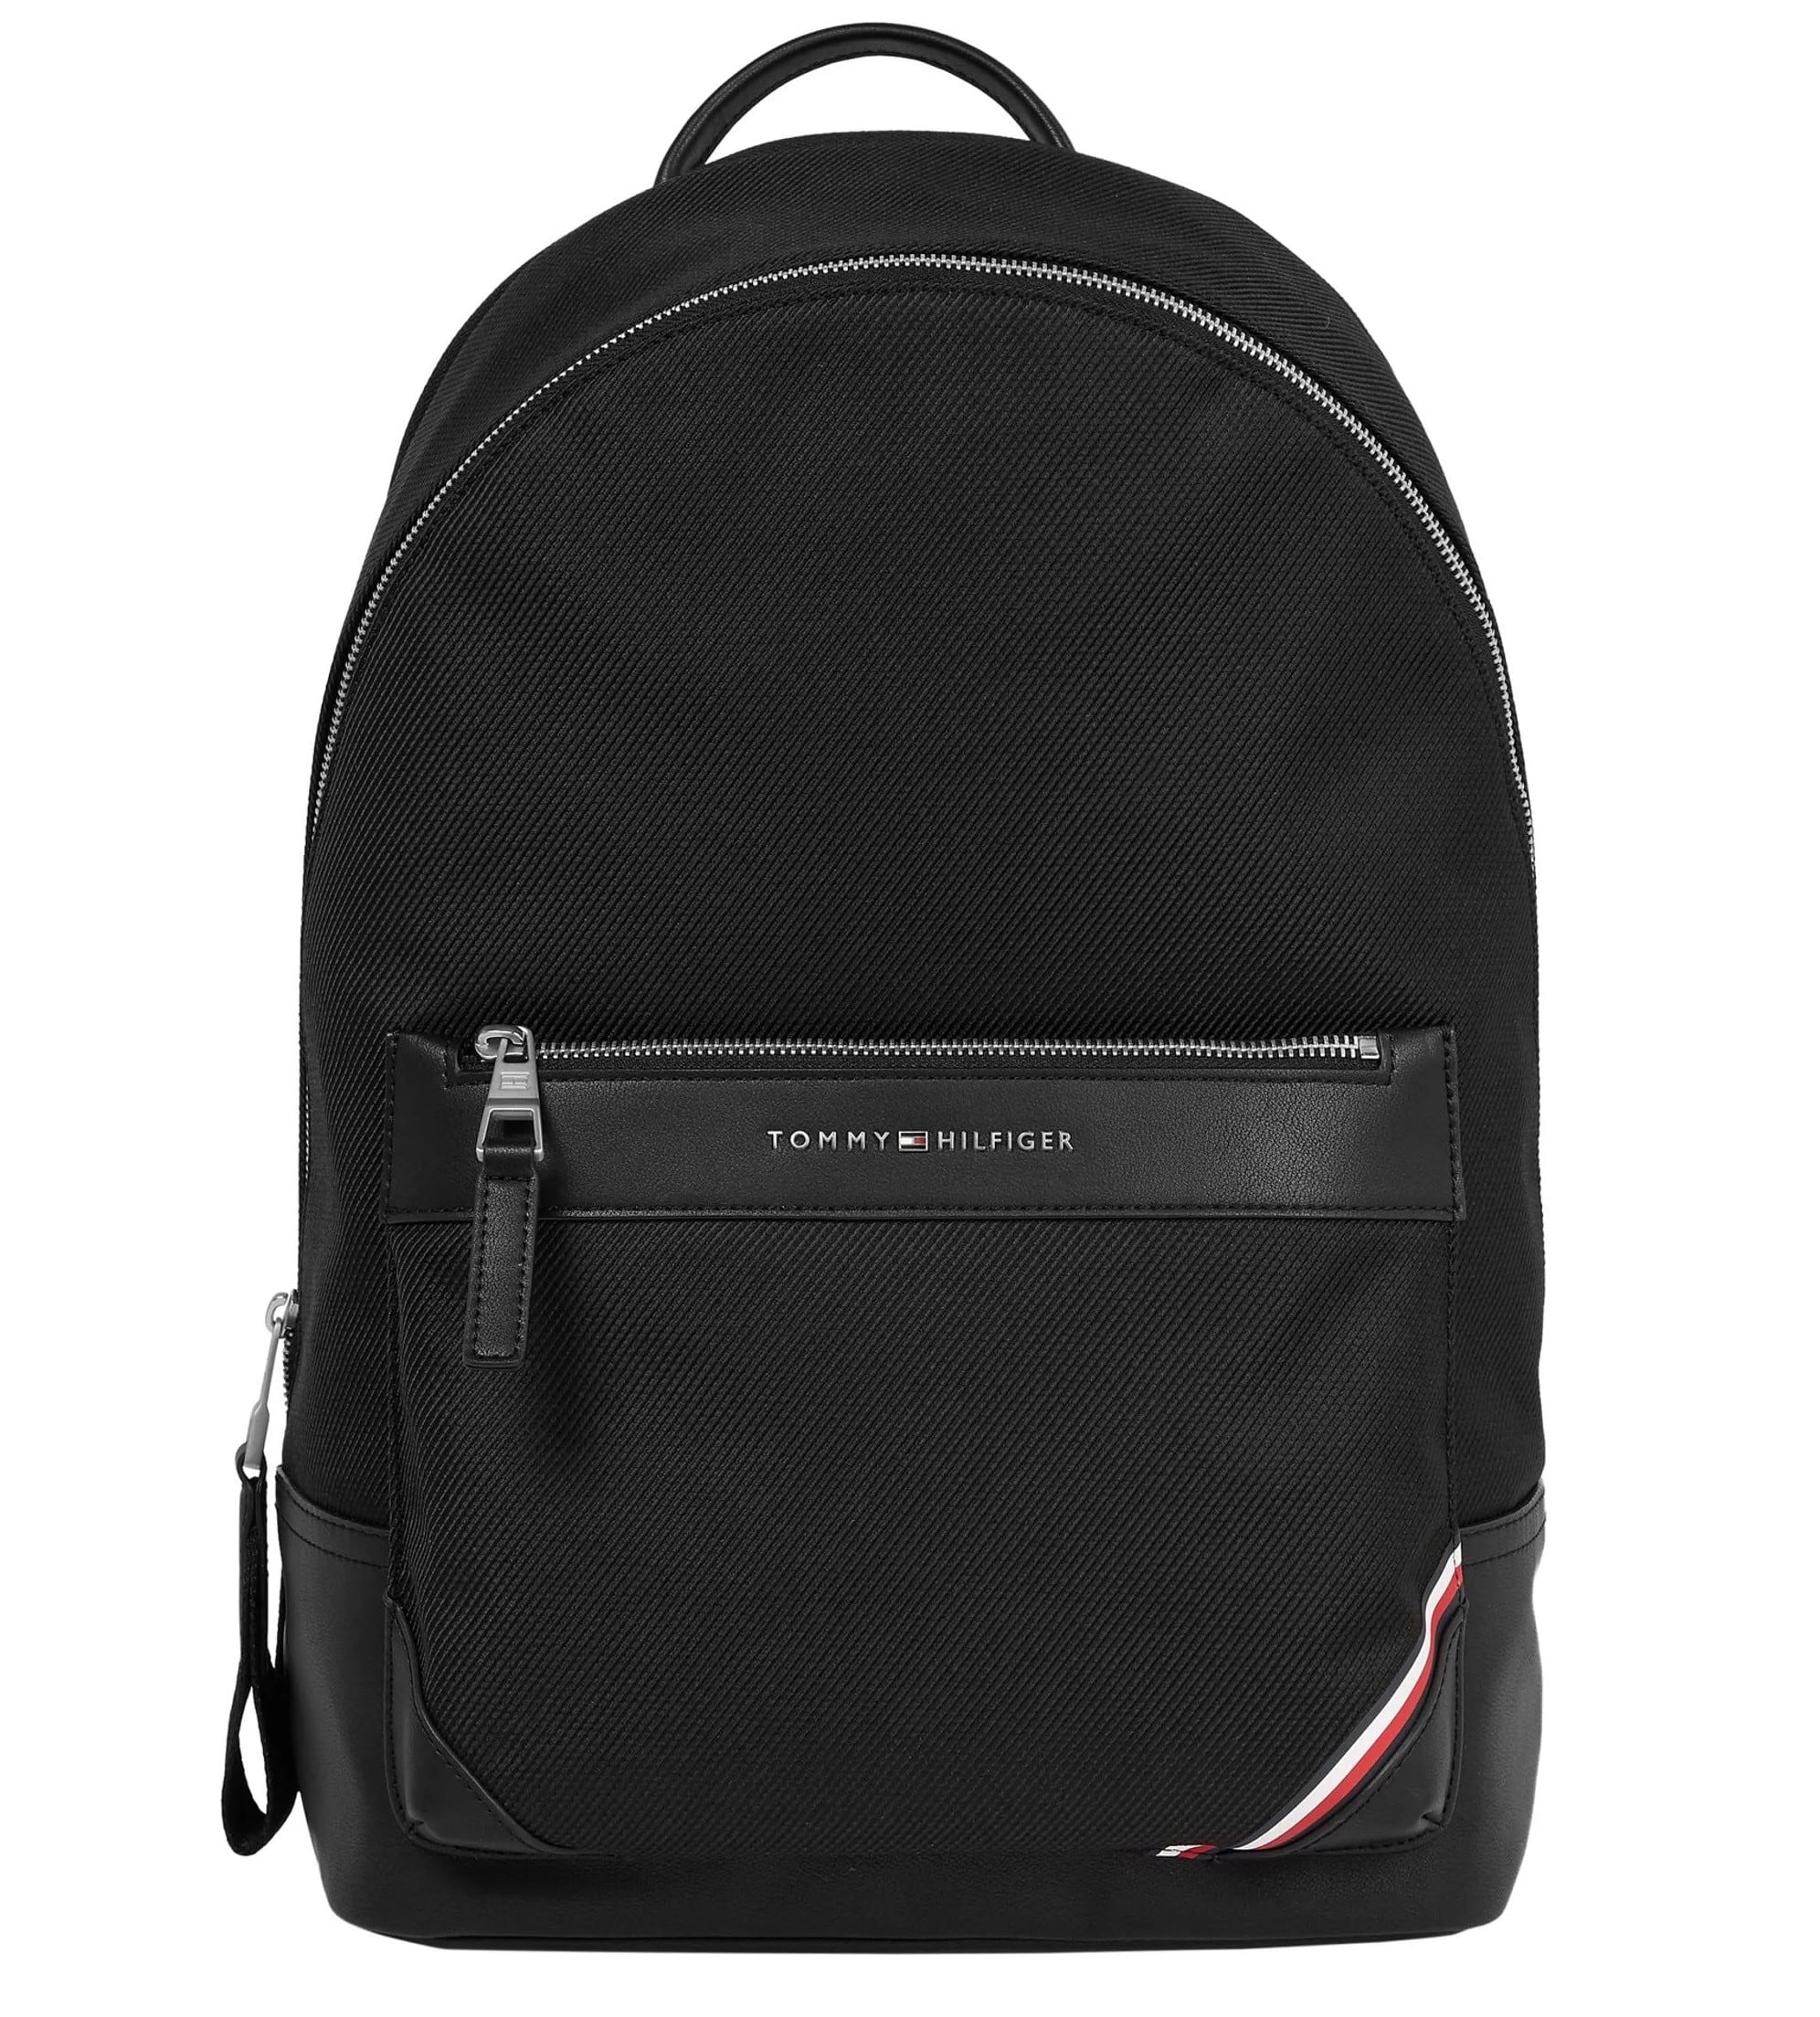 BALO TOMMY HILFIGER ESSENTIAL 1985 NYLON BACKPACK 2